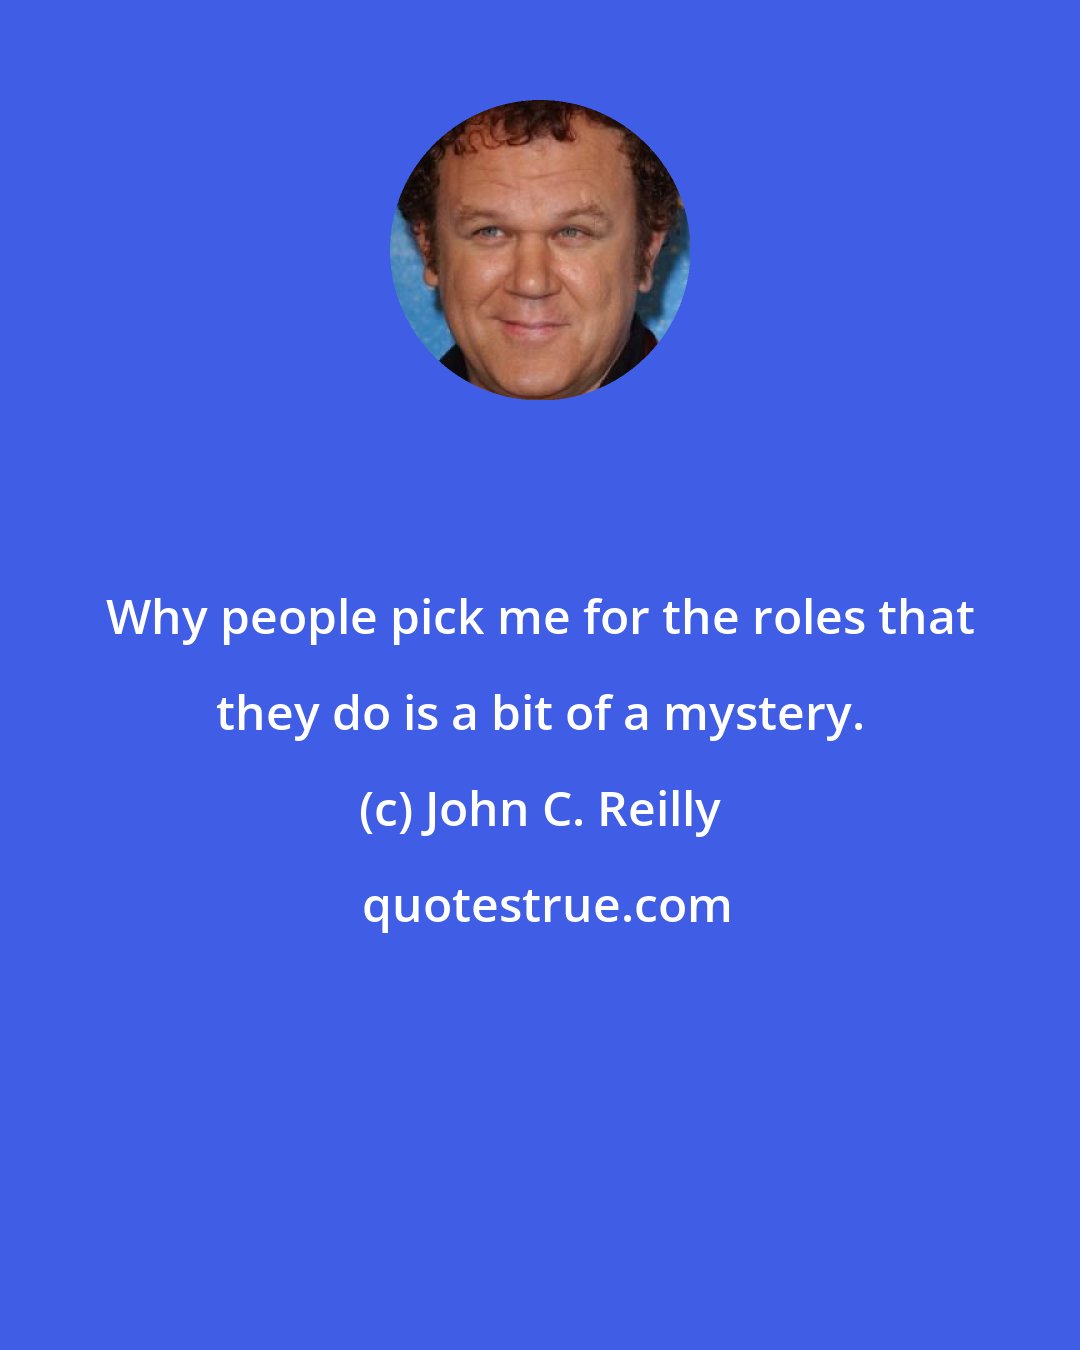 John C. Reilly: Why people pick me for the roles that they do is a bit of a mystery.